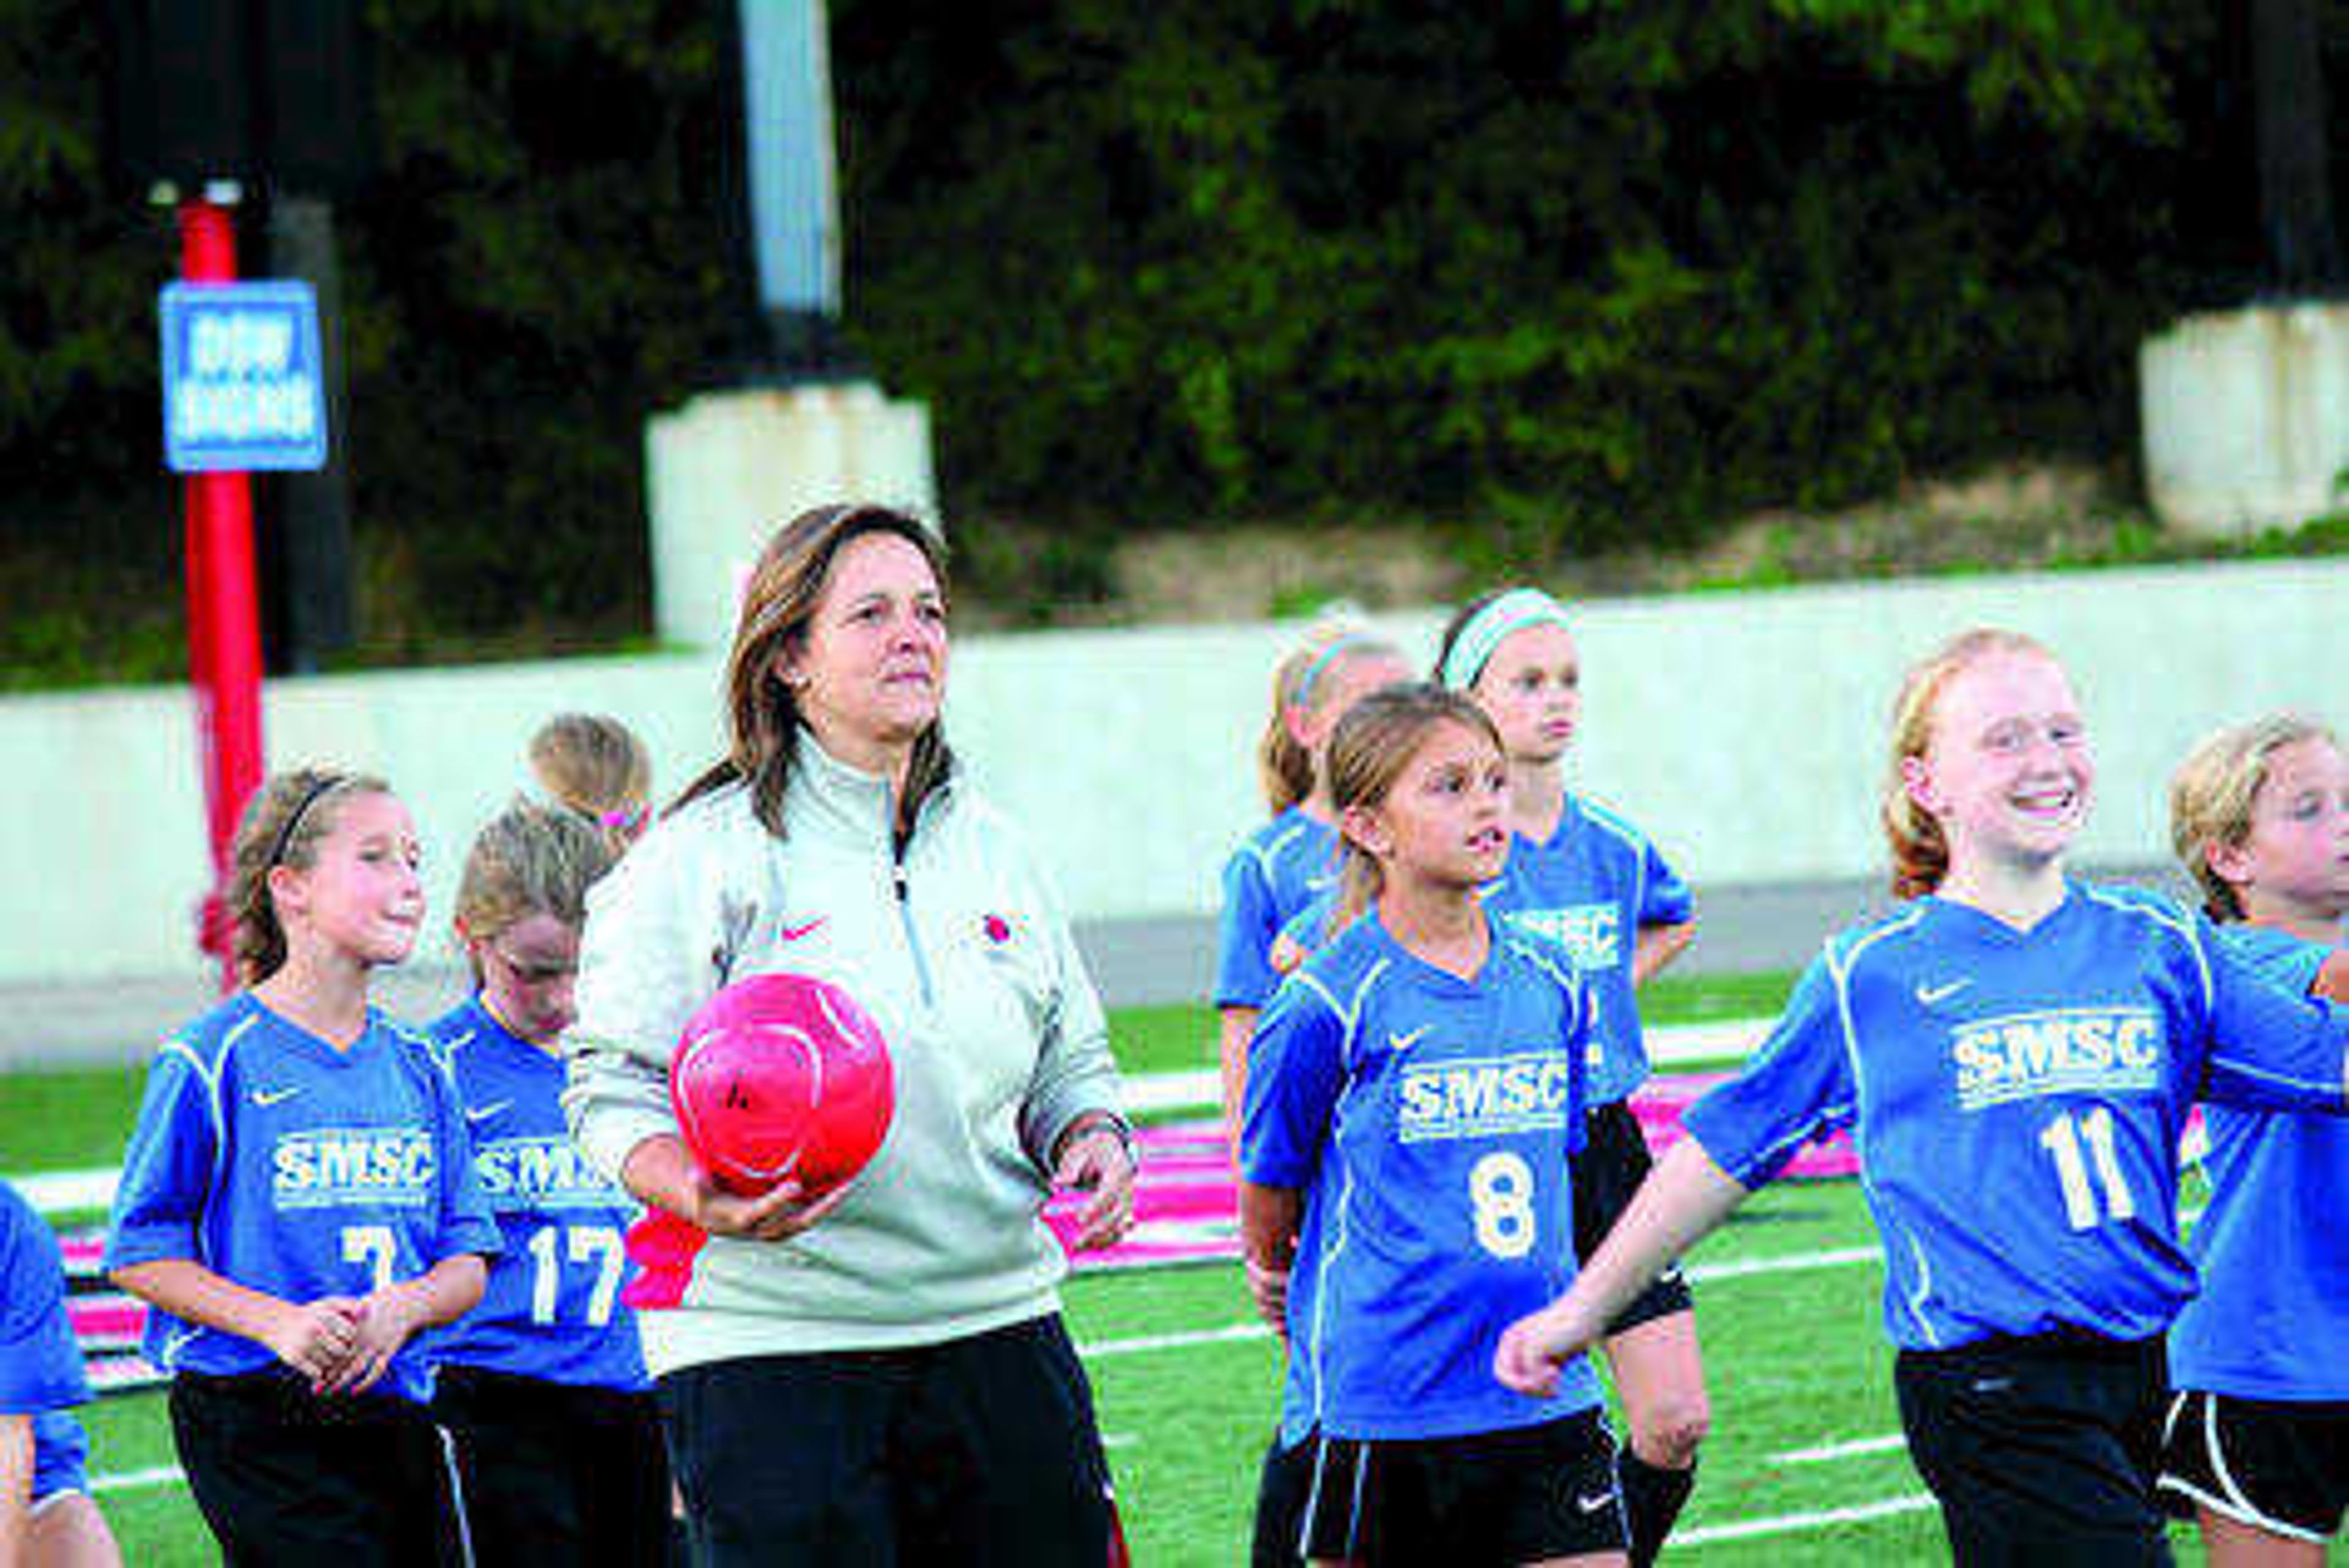 Heather Nelson and members of the Missouri Youth Club Soccer team at Houck Stadium during practice. Photos by Isaiah Adams